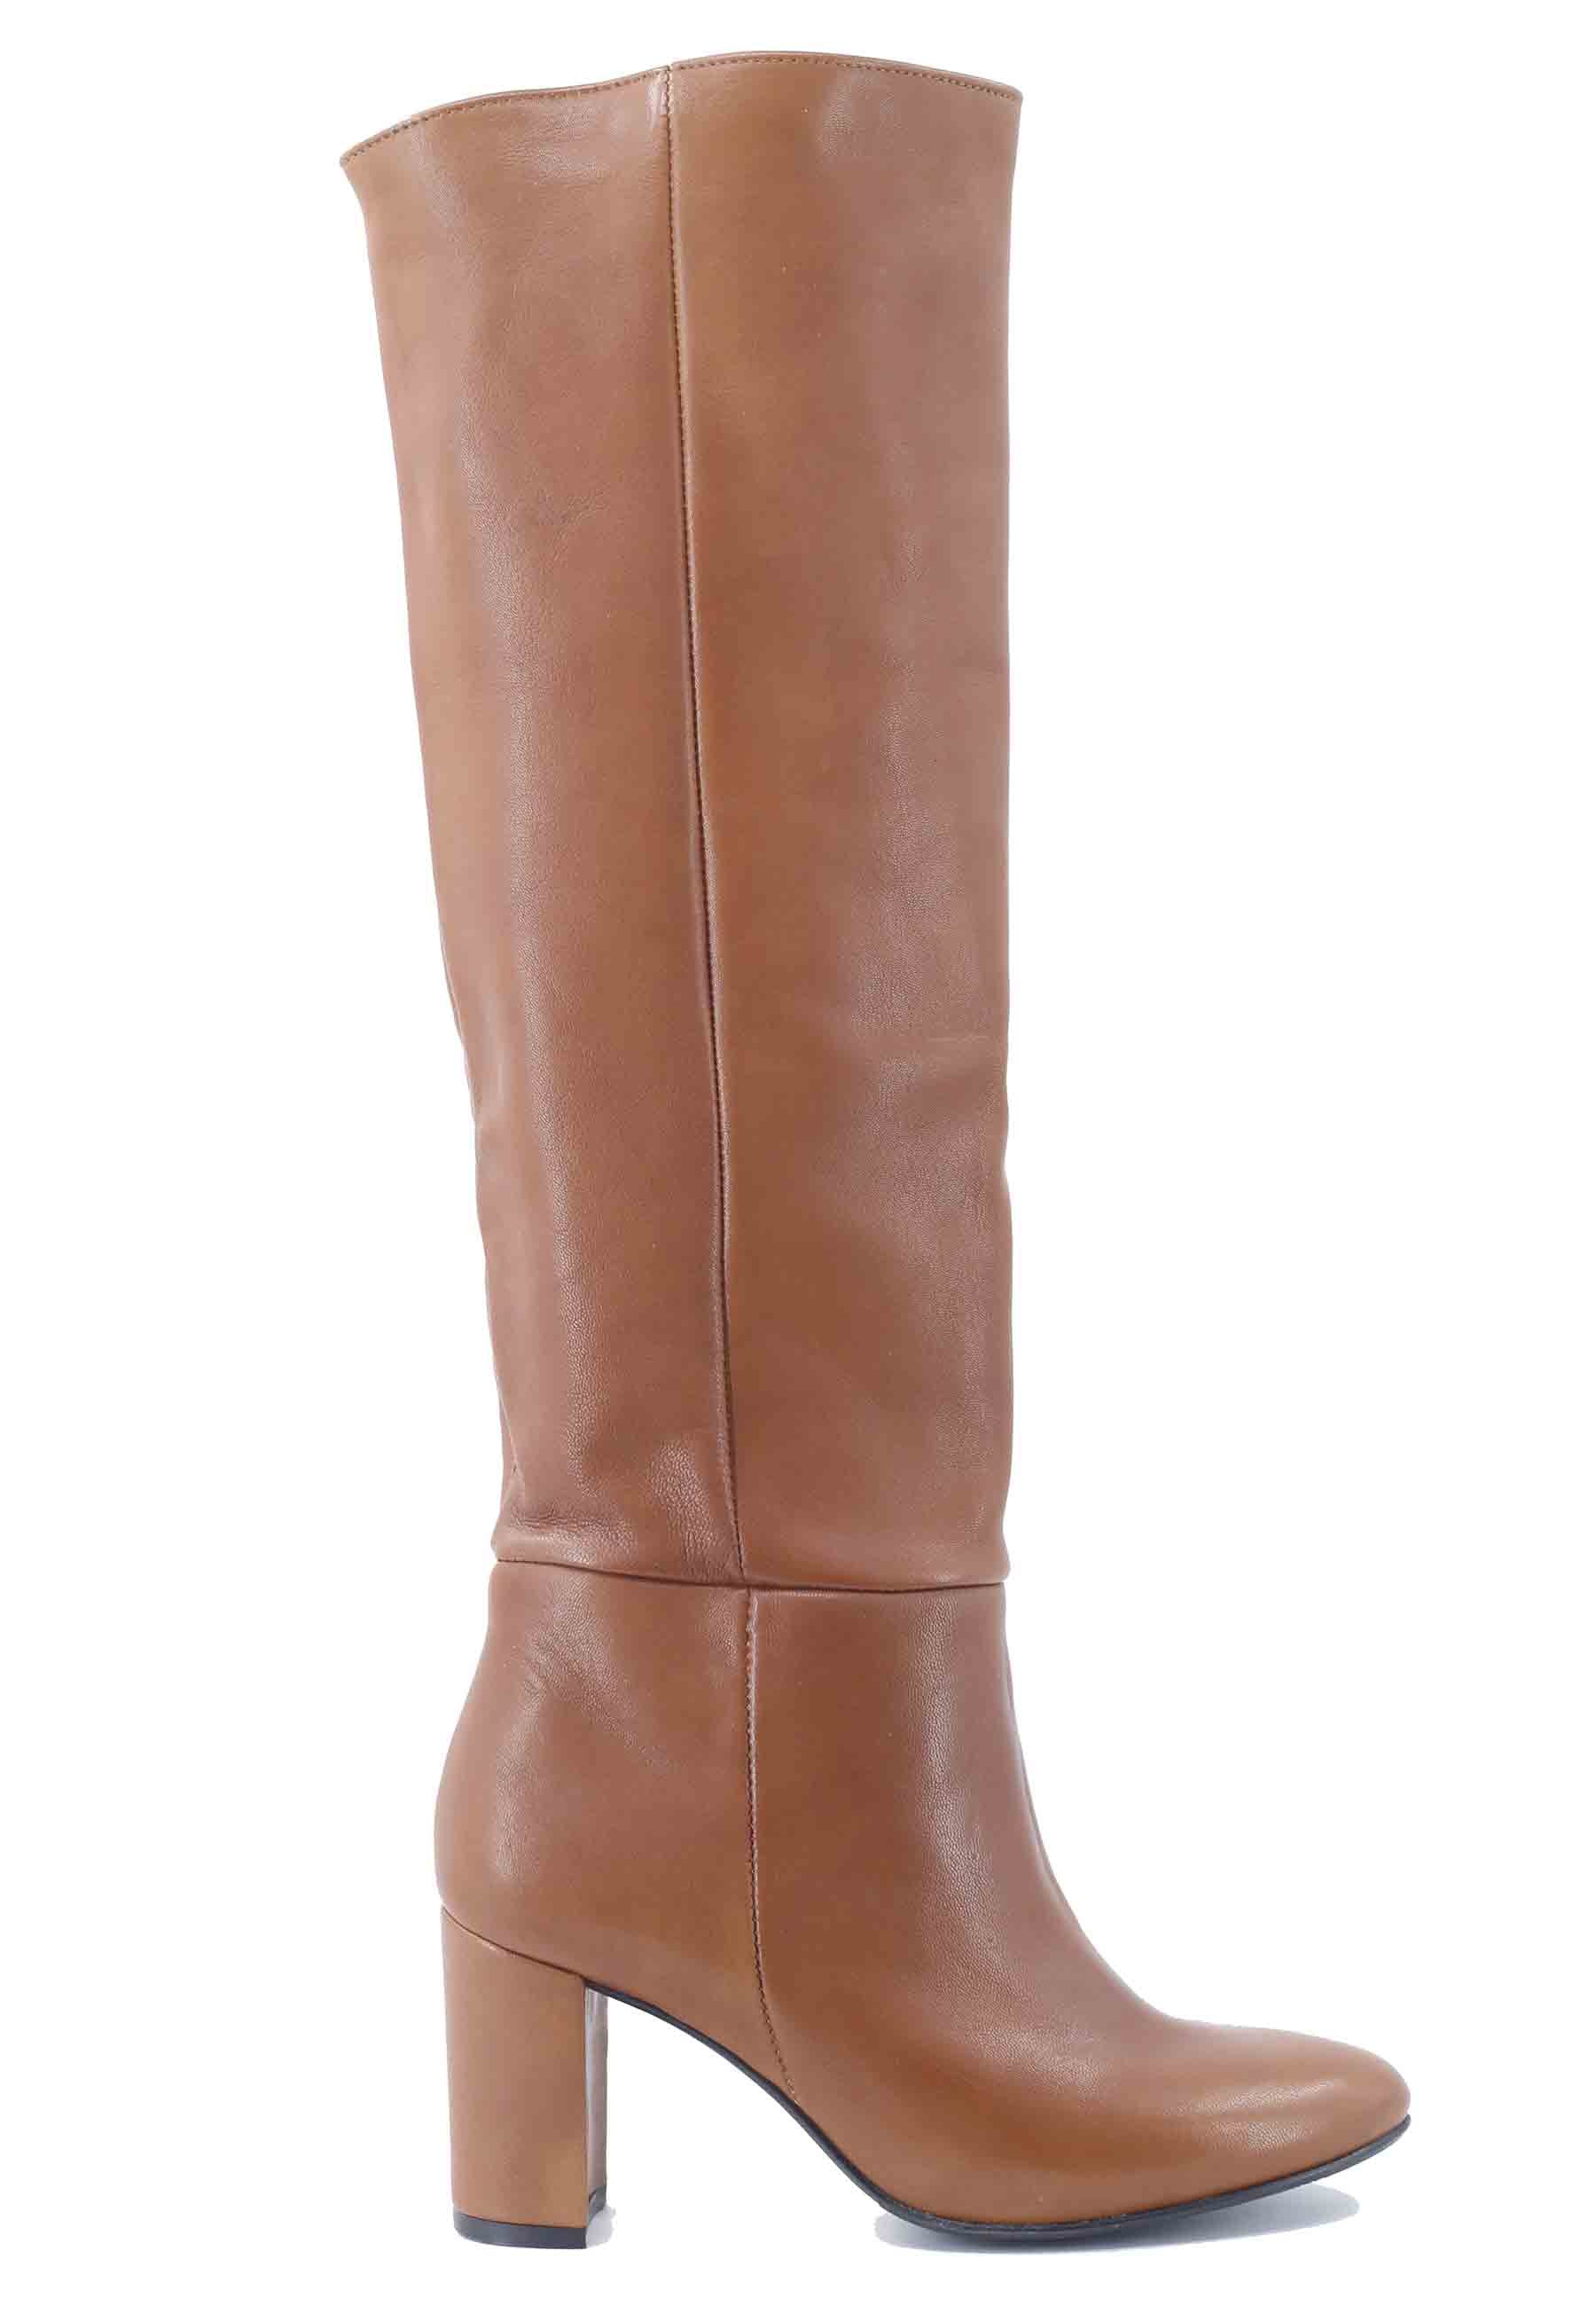 ST1593 women's tube boots in tan leather with high upper